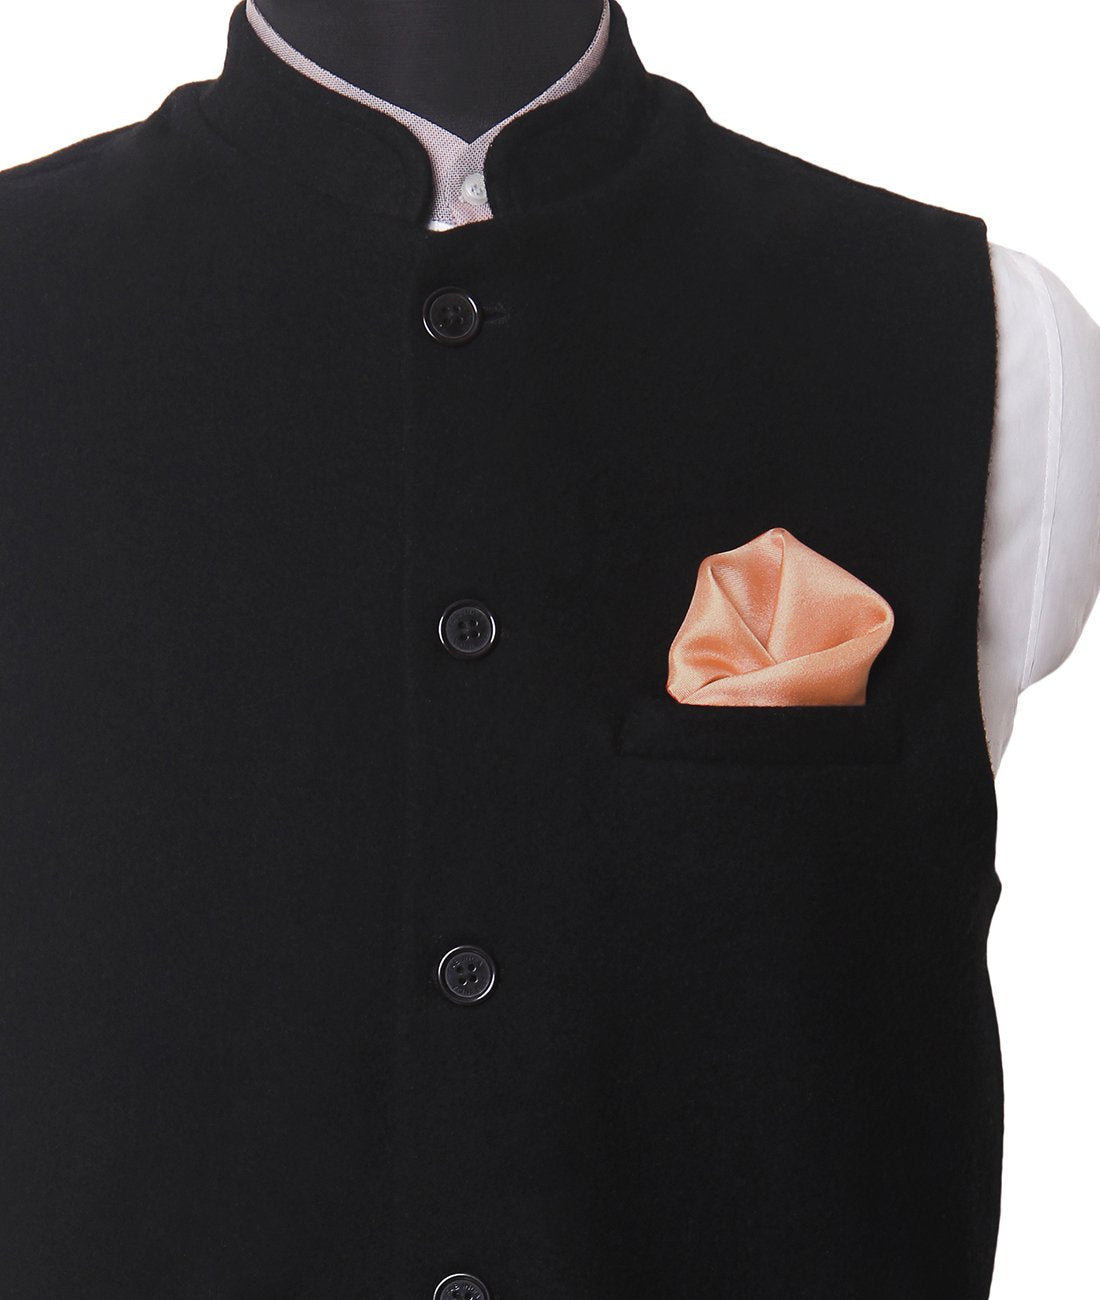 Chokore Peach Pure Silk Pocket Square, from the Solids Line